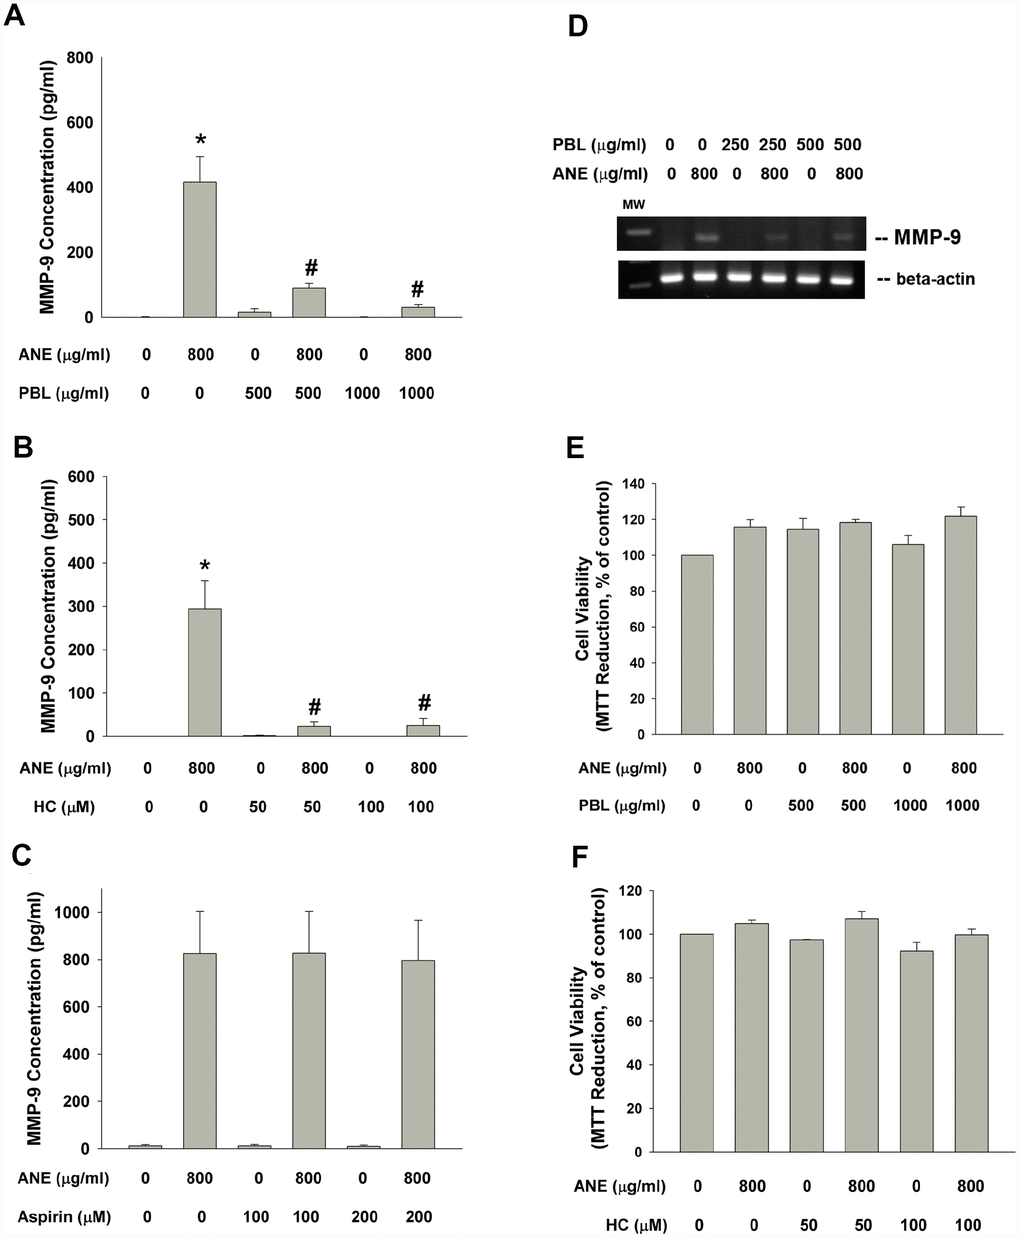 Effect of PBL, HC and aspirin on ANE-induced MMP-9 secretion. Effect of (A) PBL (500 and 1000 μg/ml), (B) HC (50 and 100 μM) and (C) aspirin (100 and 200 μM) on ANE (800 μg/ml)-induced MMP-9 secretion in SAS oral cancer epithelial cells. Results were expressed as Mean ± SE (pg/ml). (D) Effect of PBL on ANE-induced MMP-9 expression, and effect of (E) PBL and (F) HC on ANE-induced changes of cell viability of SAS cells (as % of control, Mean ± SE).